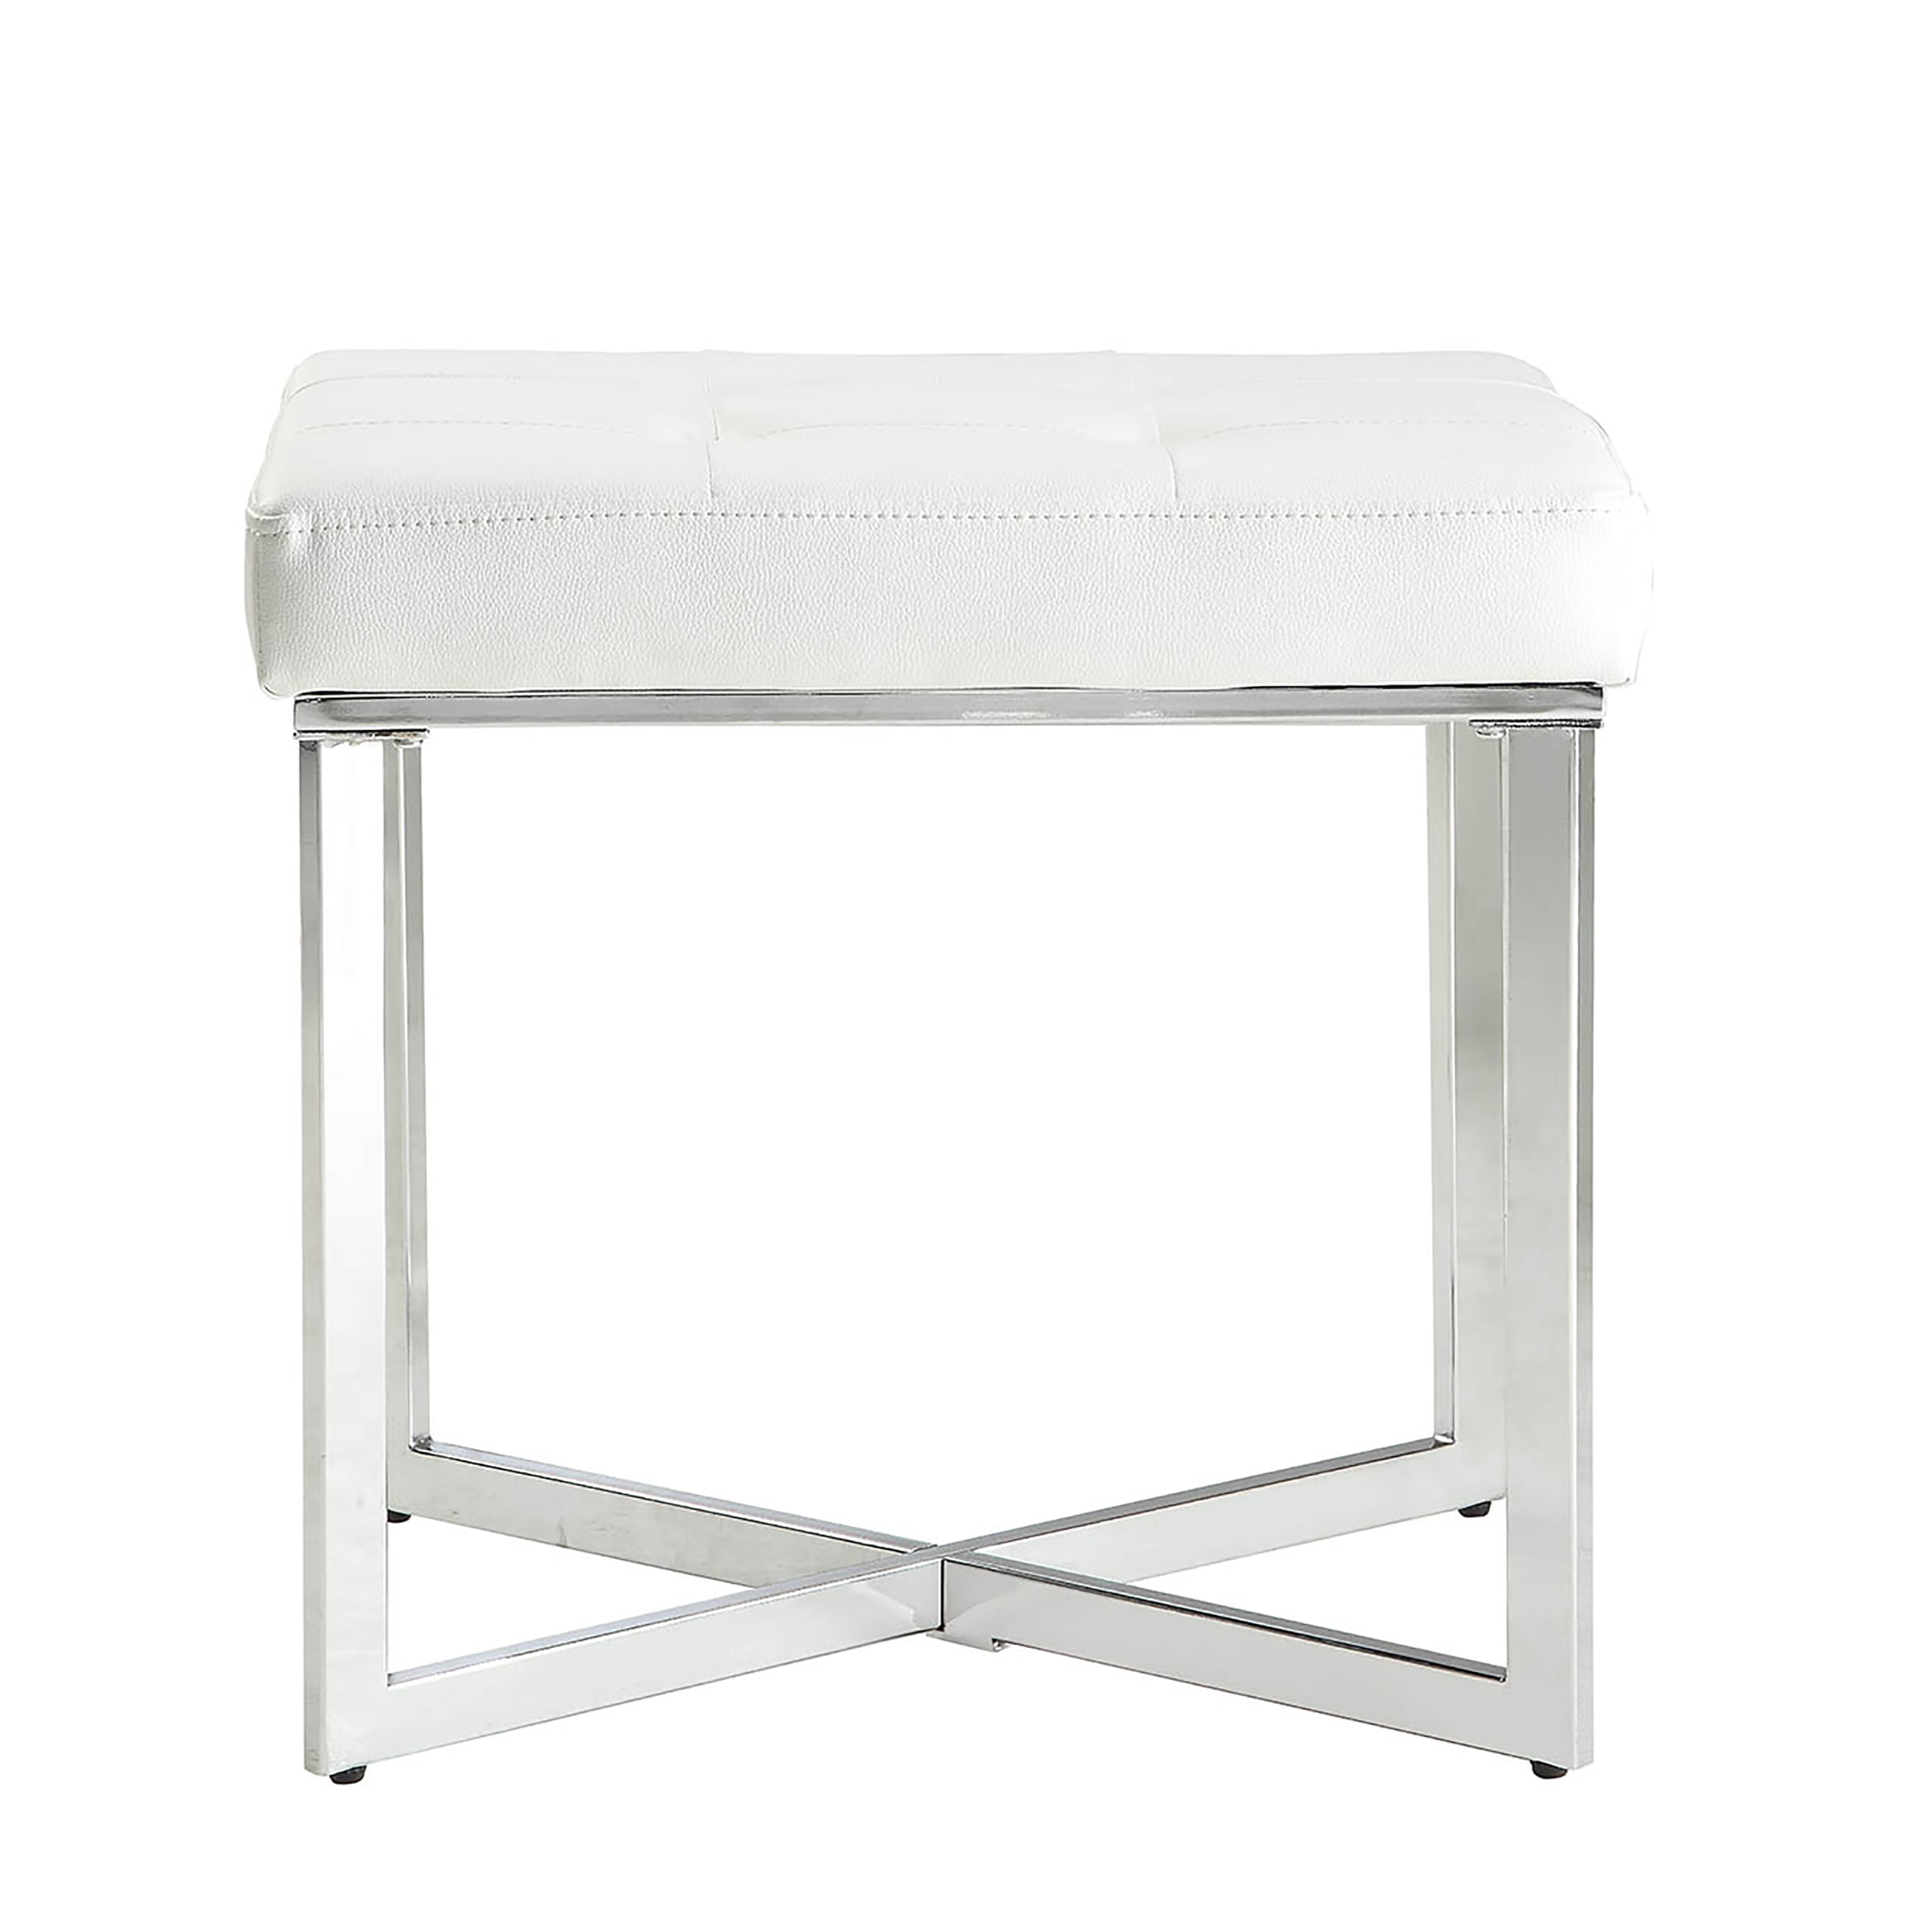 Seat Vanity Bench With Chrome Sled Base, Vanity Stools Or Benches